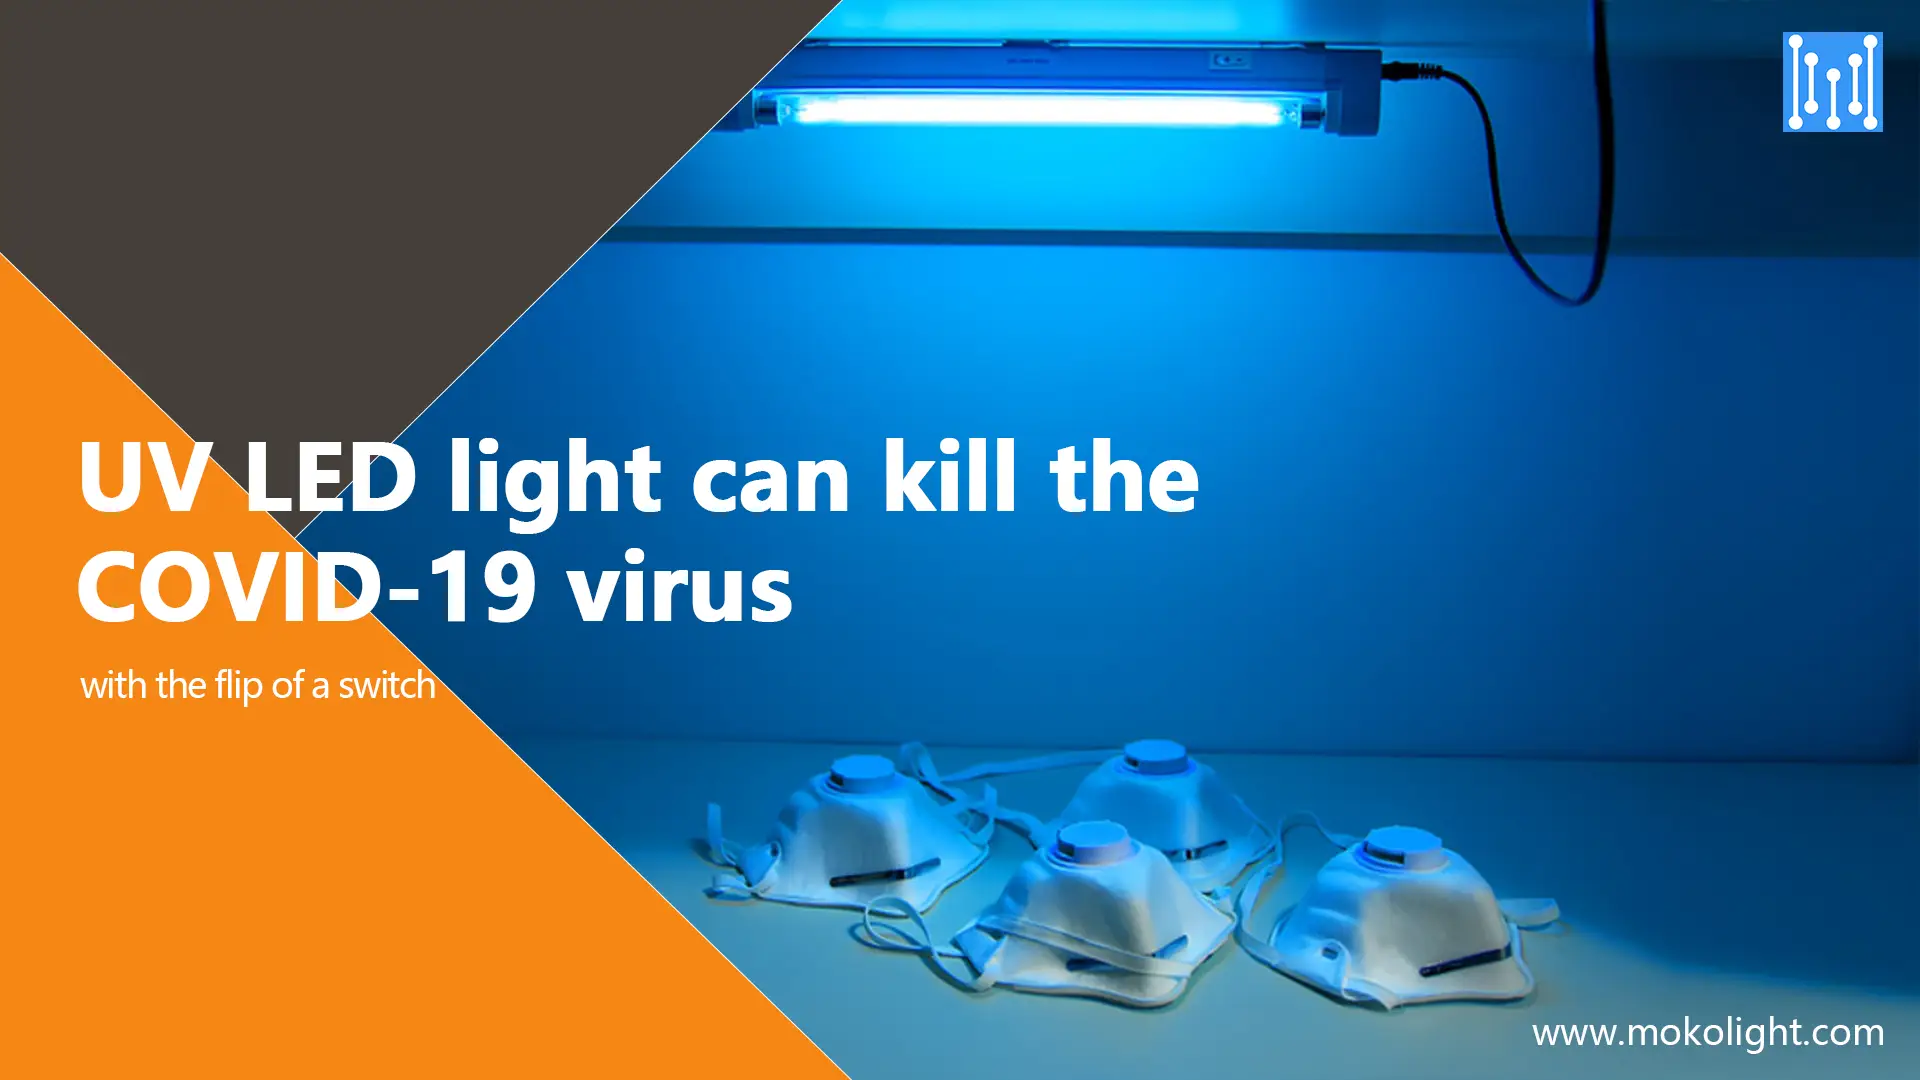 UV LED light can kill the COVID-19 virus with the flip of a switch